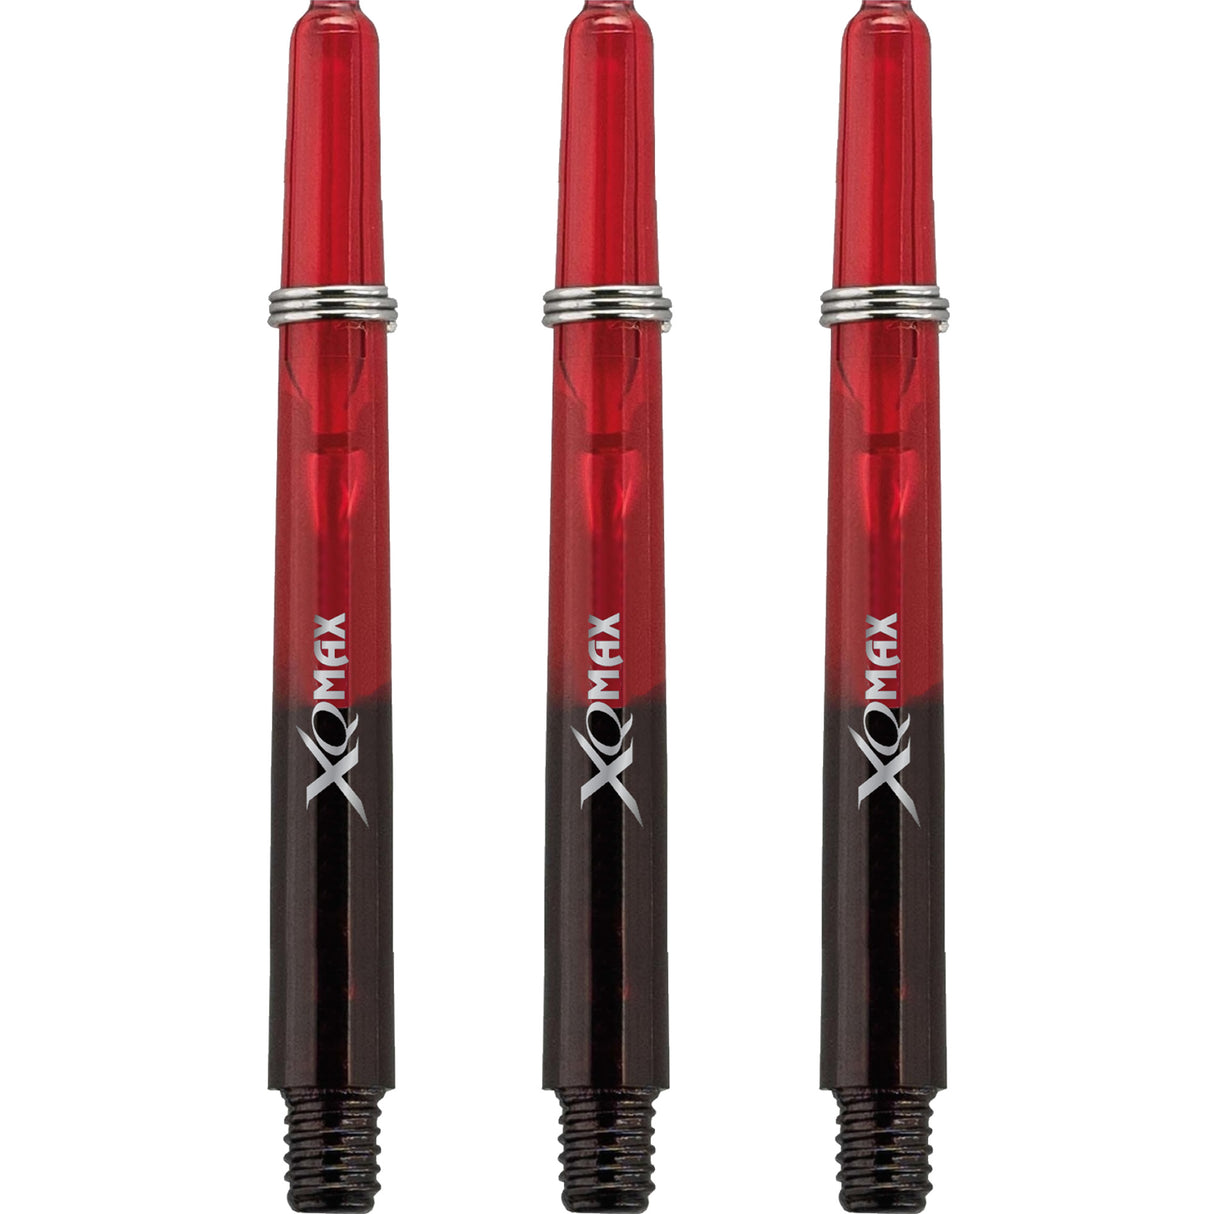 XQMax Gradient Polycarbonate Dart Shafts - with Logo - includes Springs - Black & Red